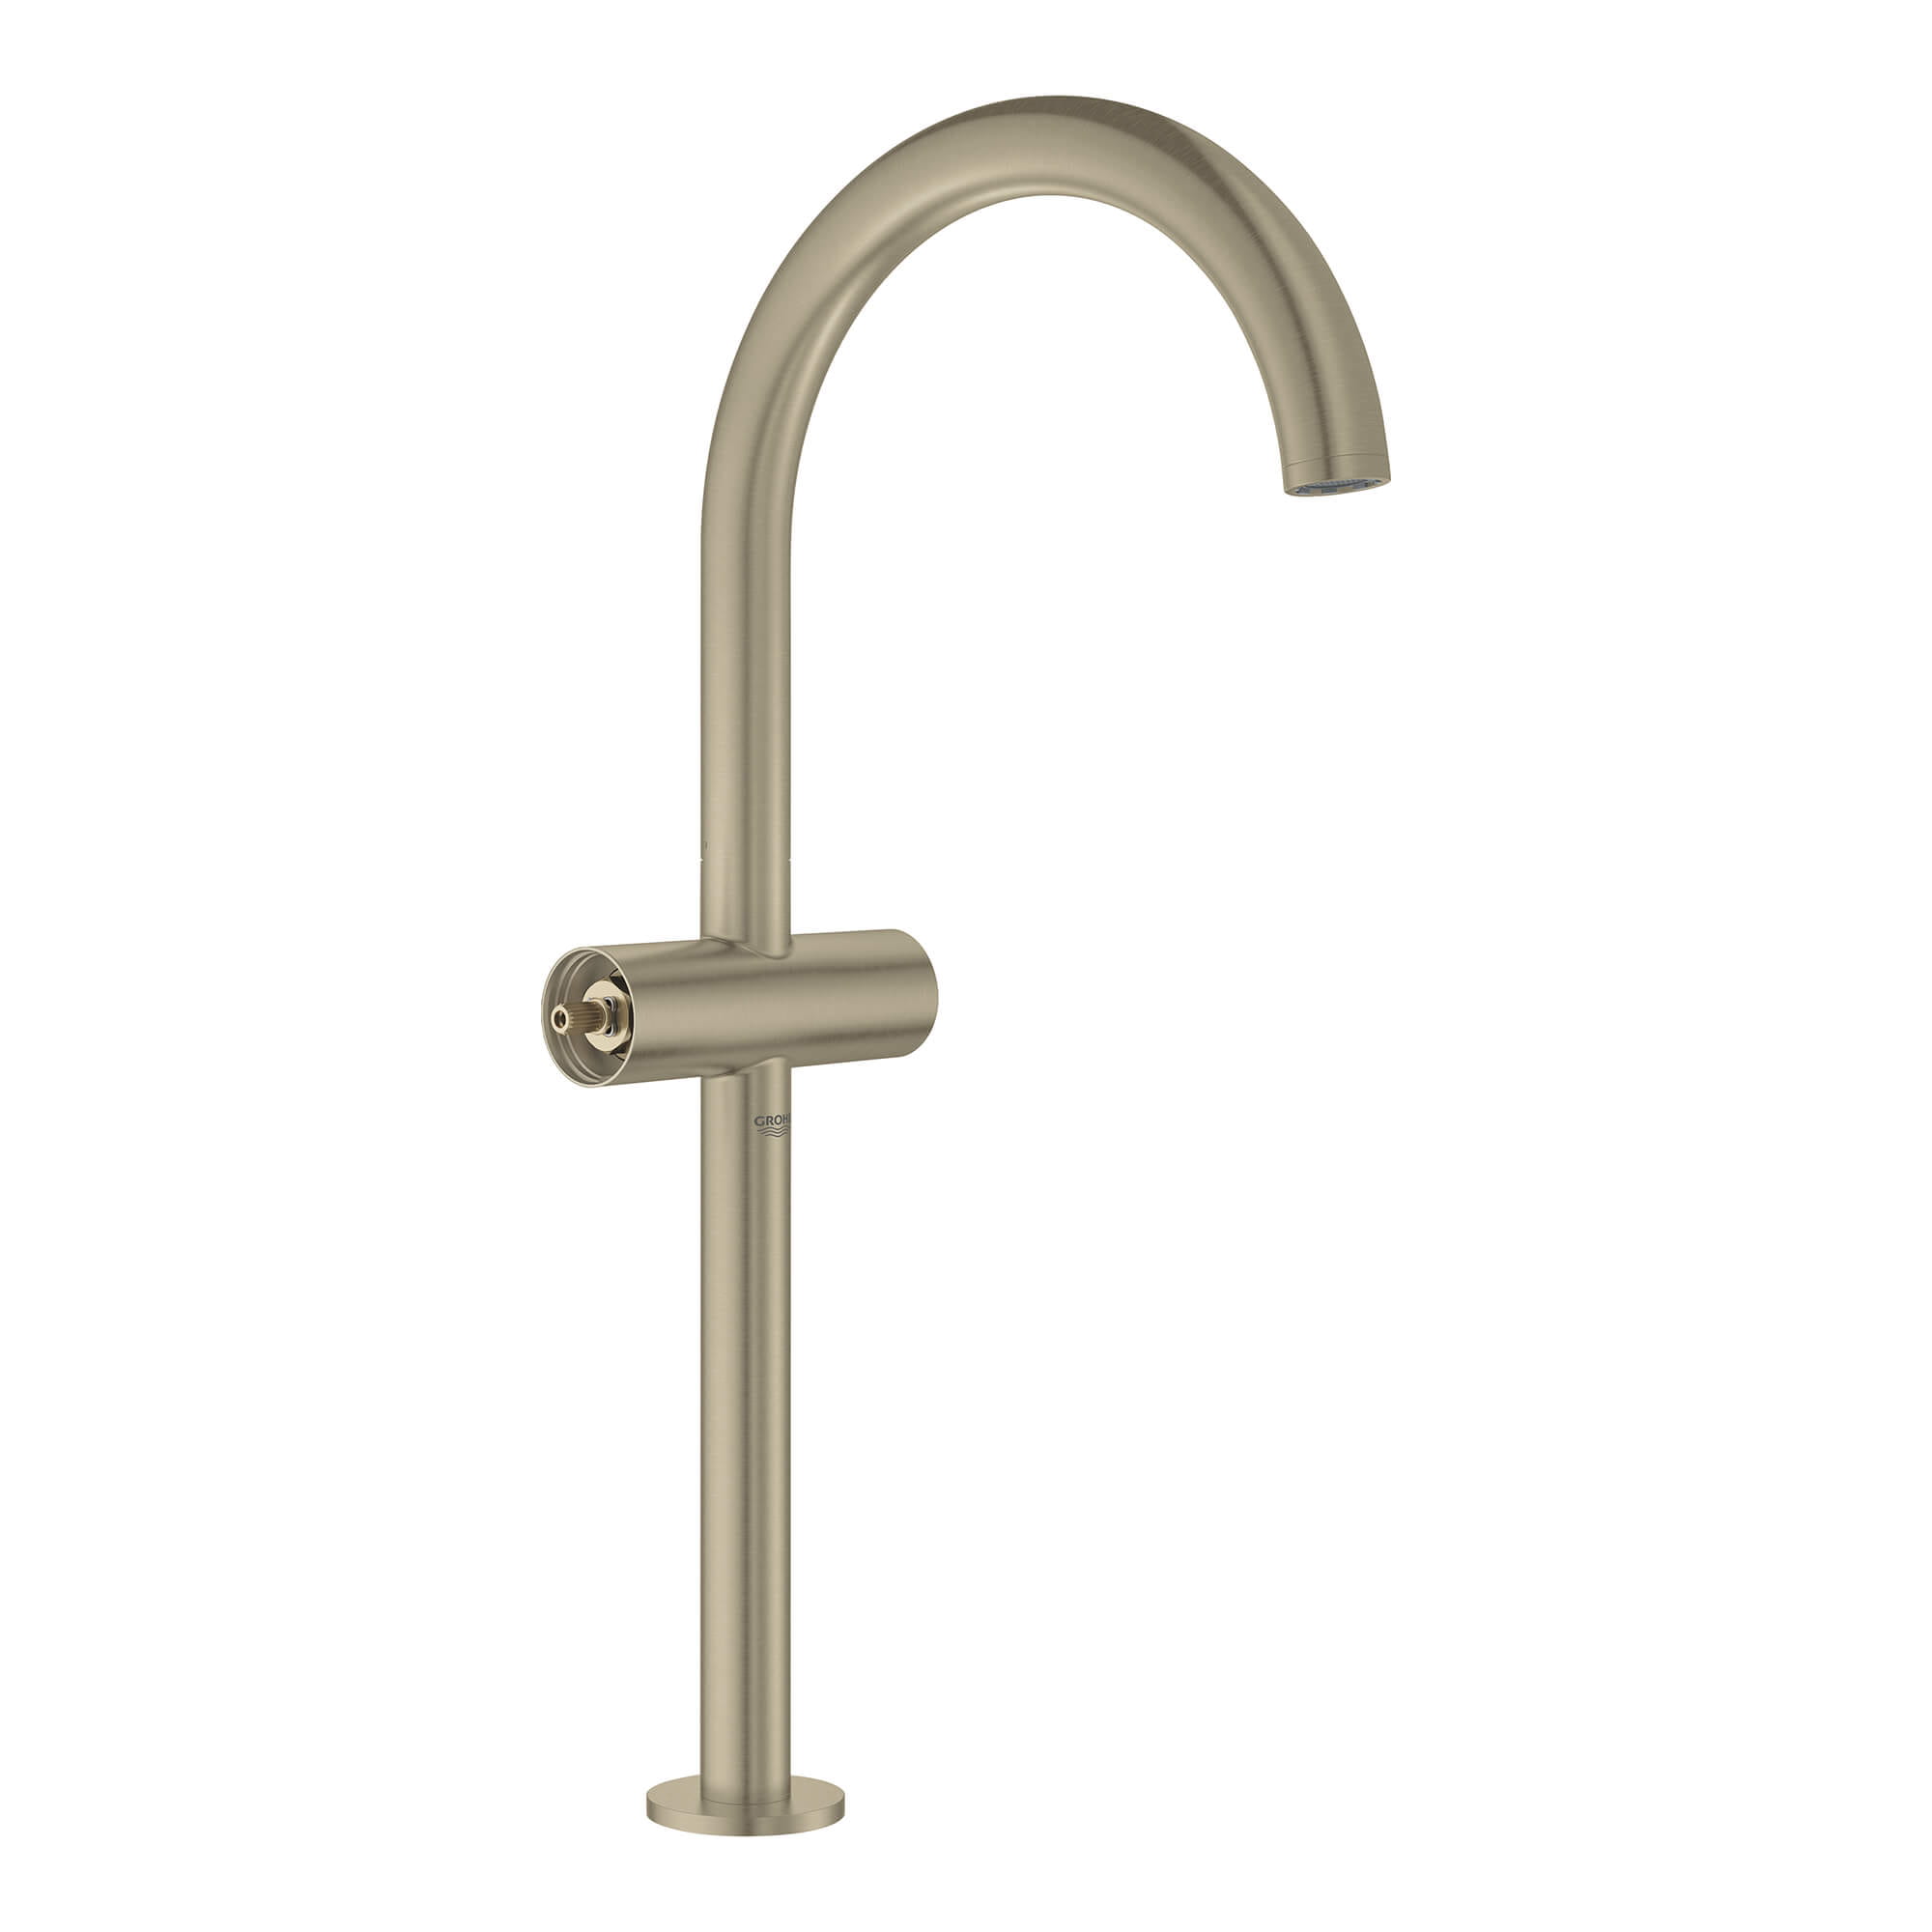 Robinet monotrou pour vasque GROHE BRUSHED NICKEL